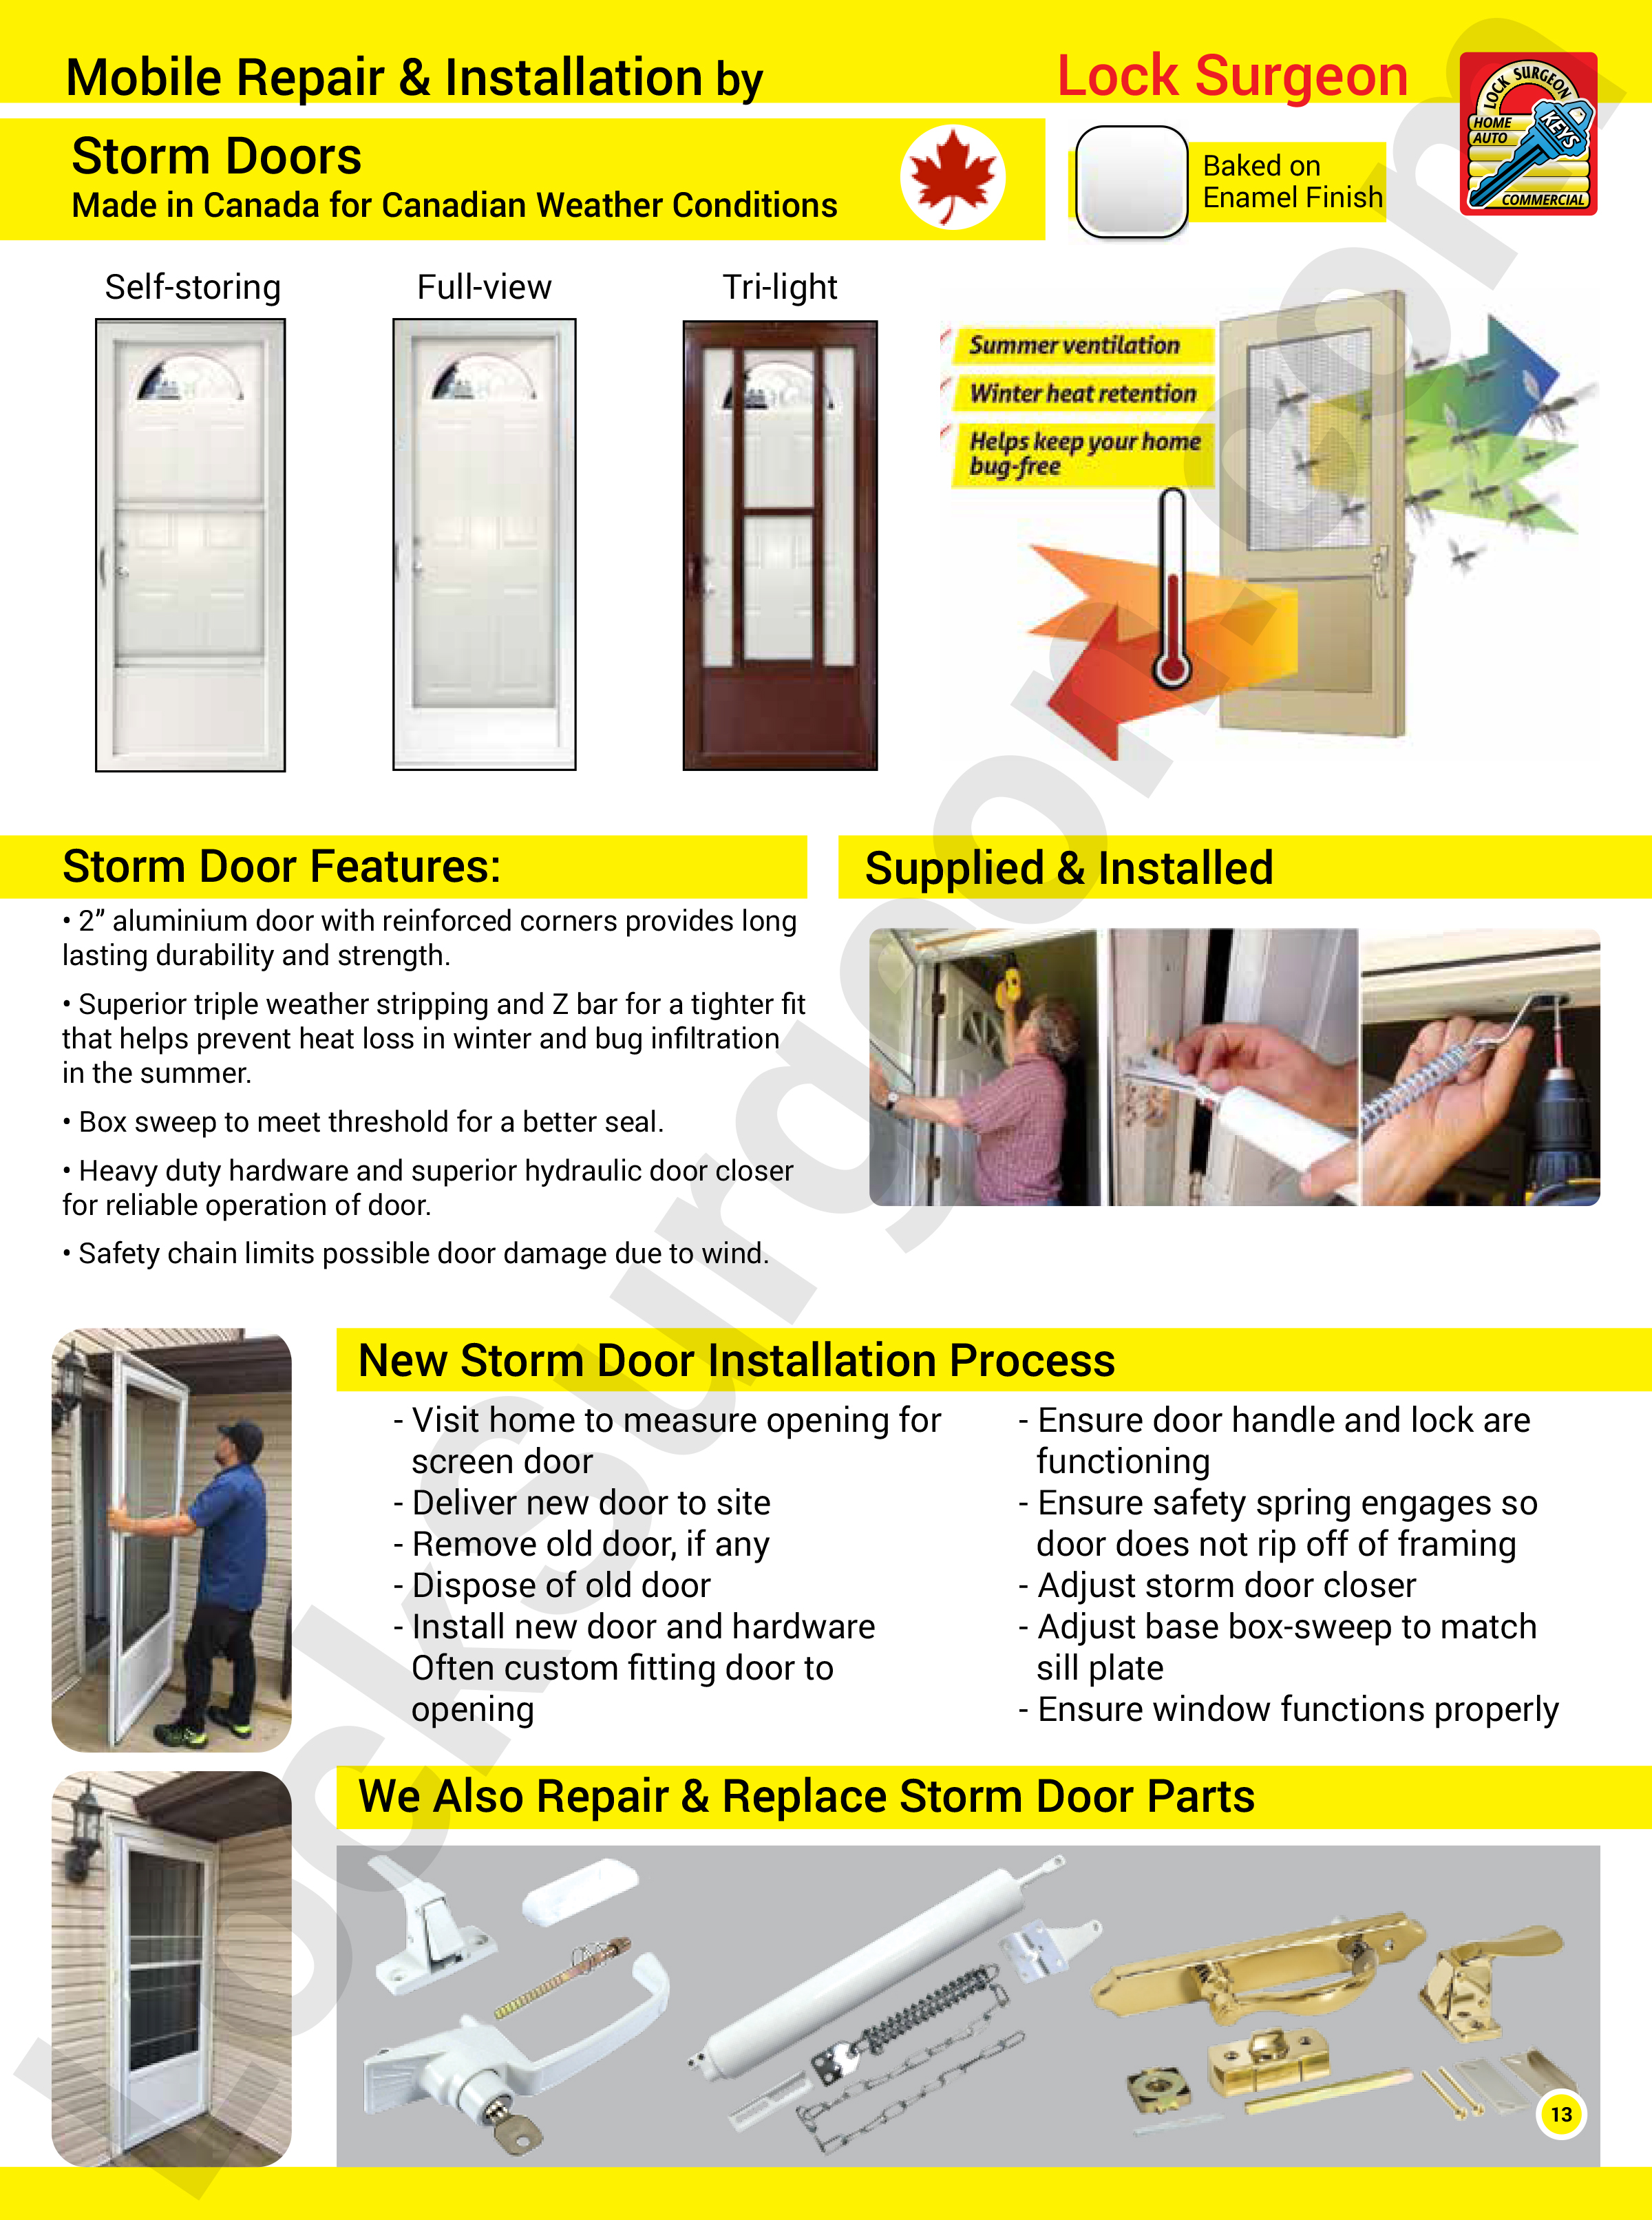 Lock Surgeon South Edmonton repair & installation of storm doors made in canada for canadian weather